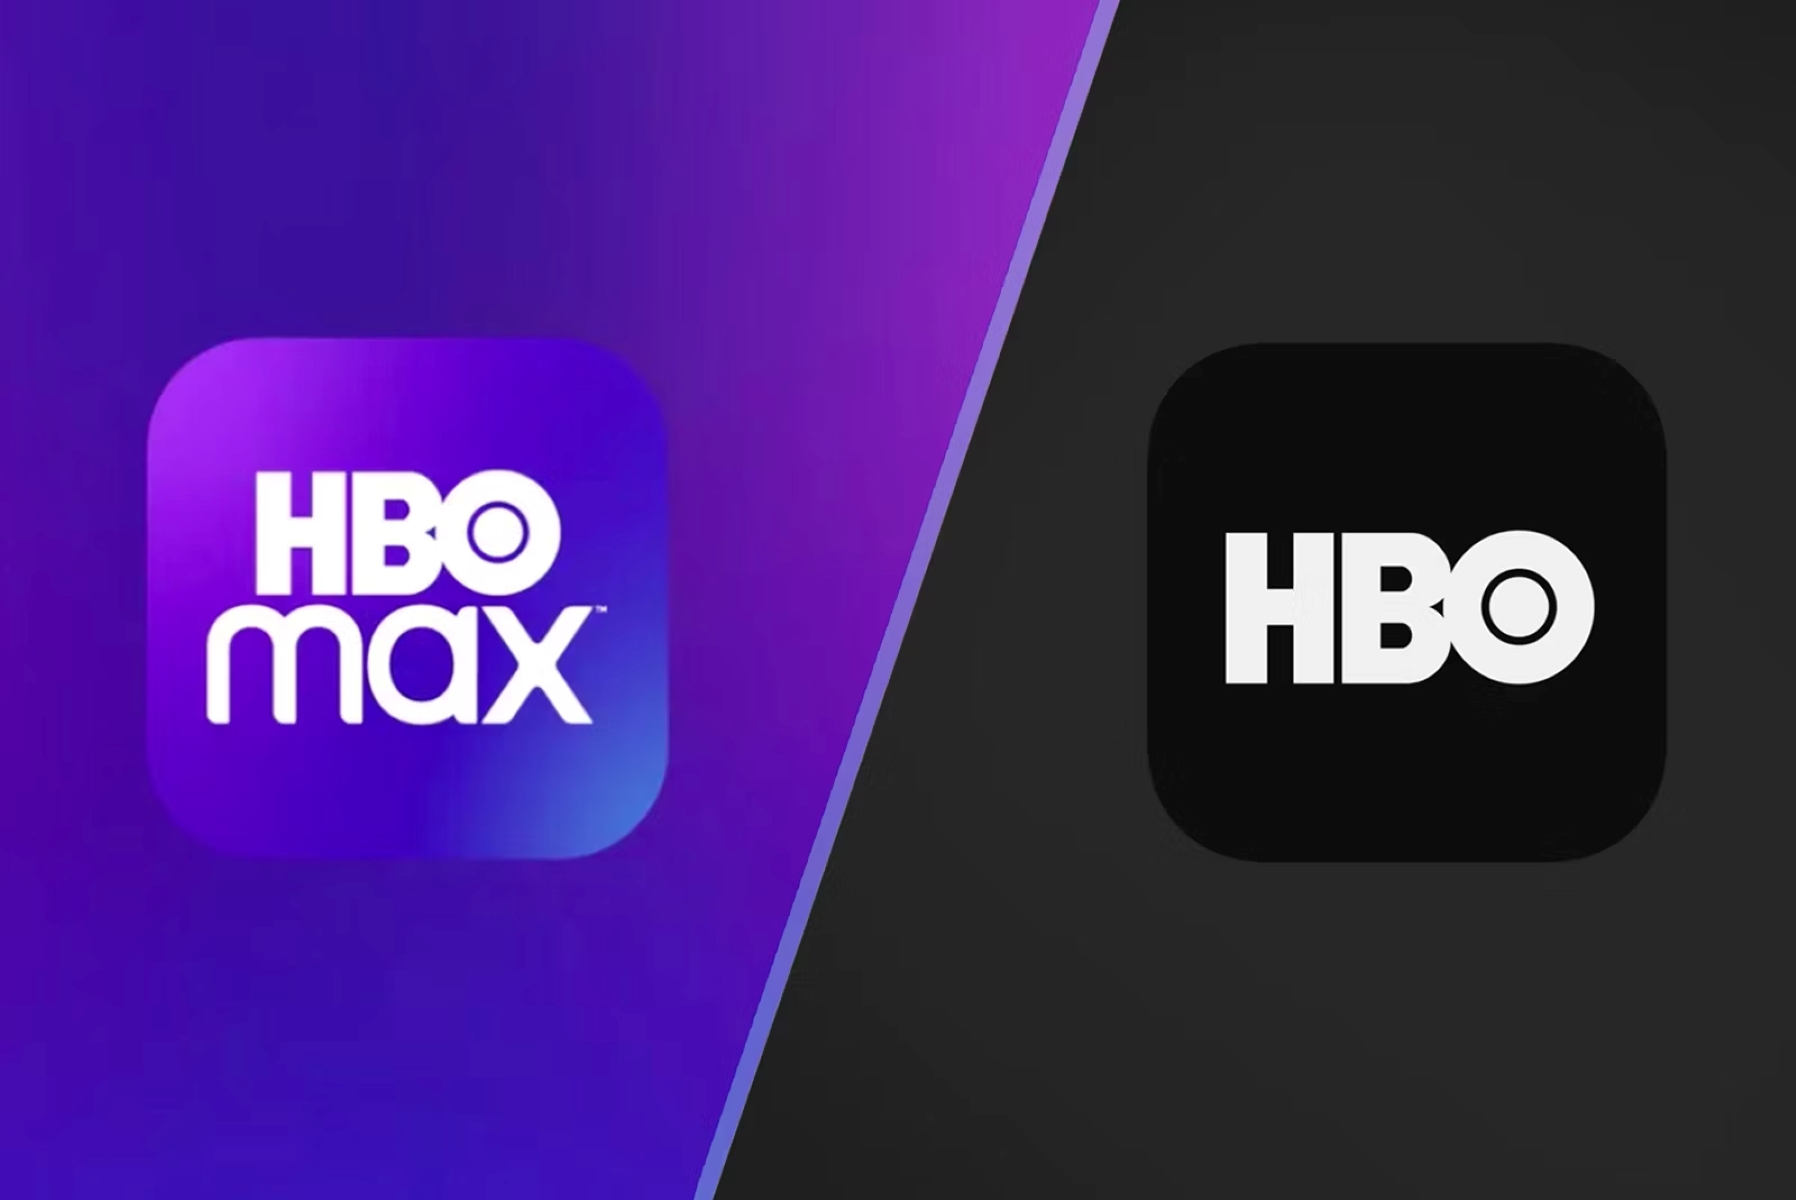 What Is The Difference Between HBO And HBO Max